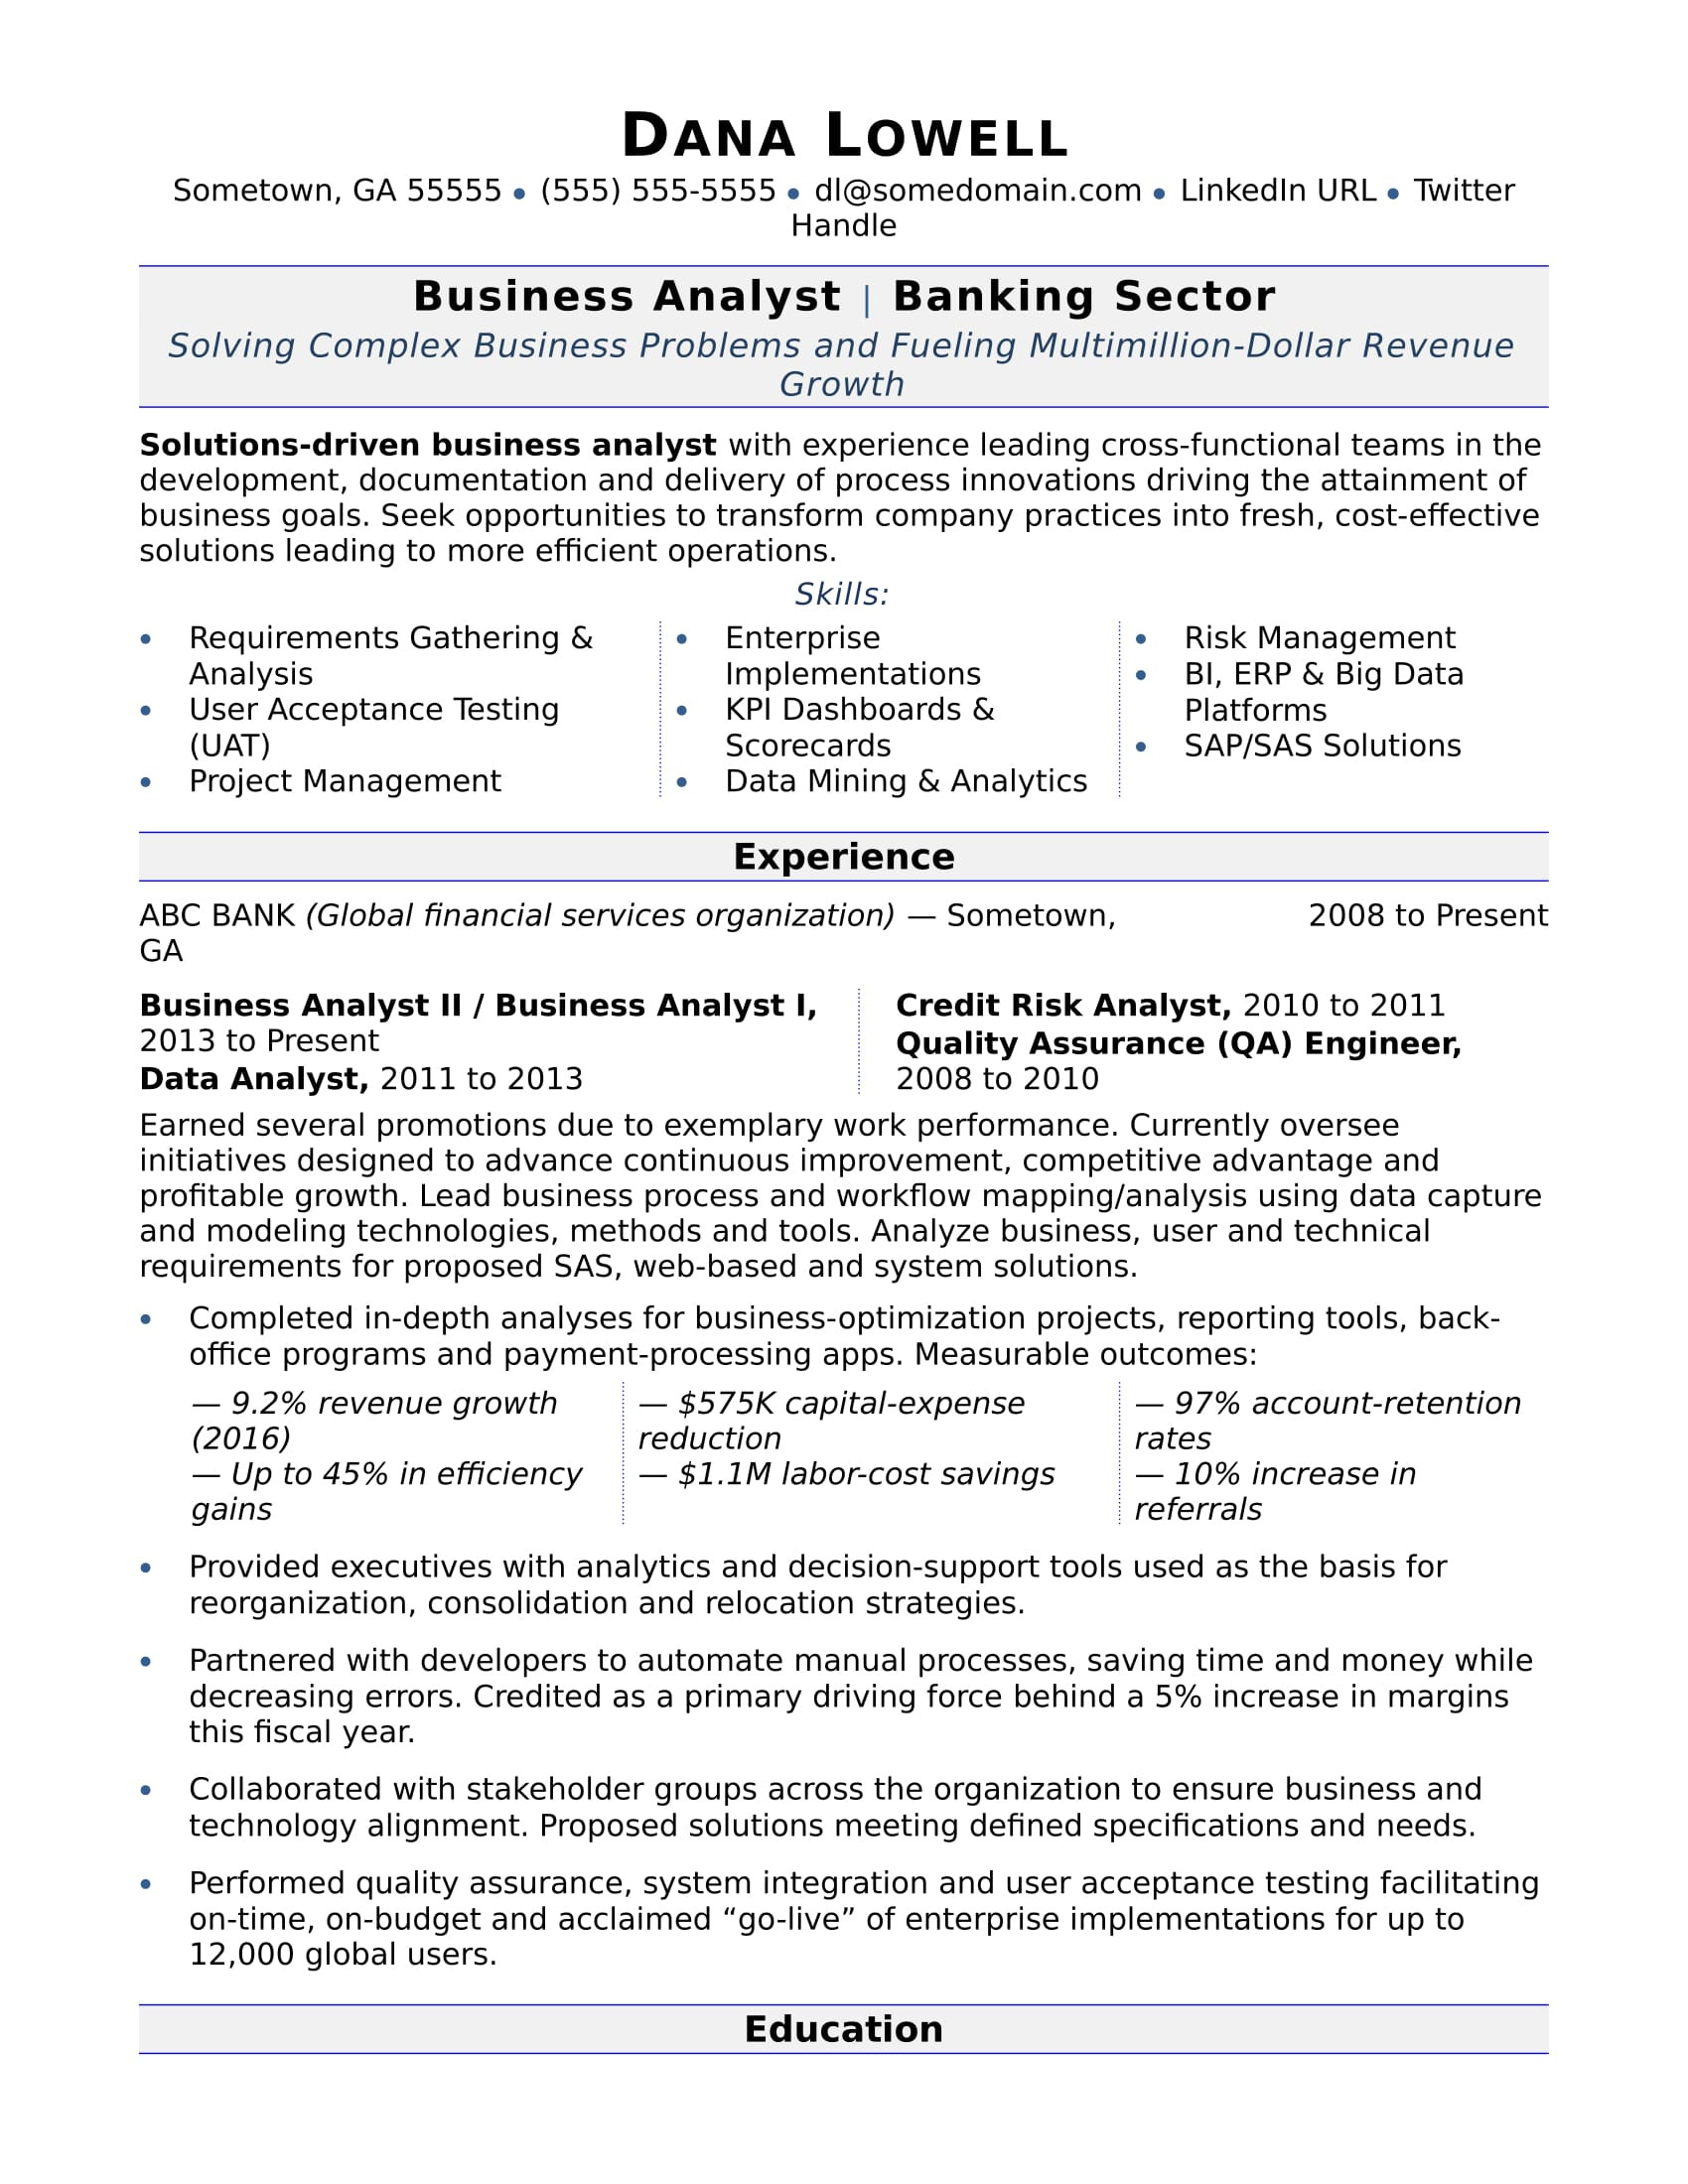 Sample Resume for Business Analyst Position Business Analyst Resume Sample Monster.com